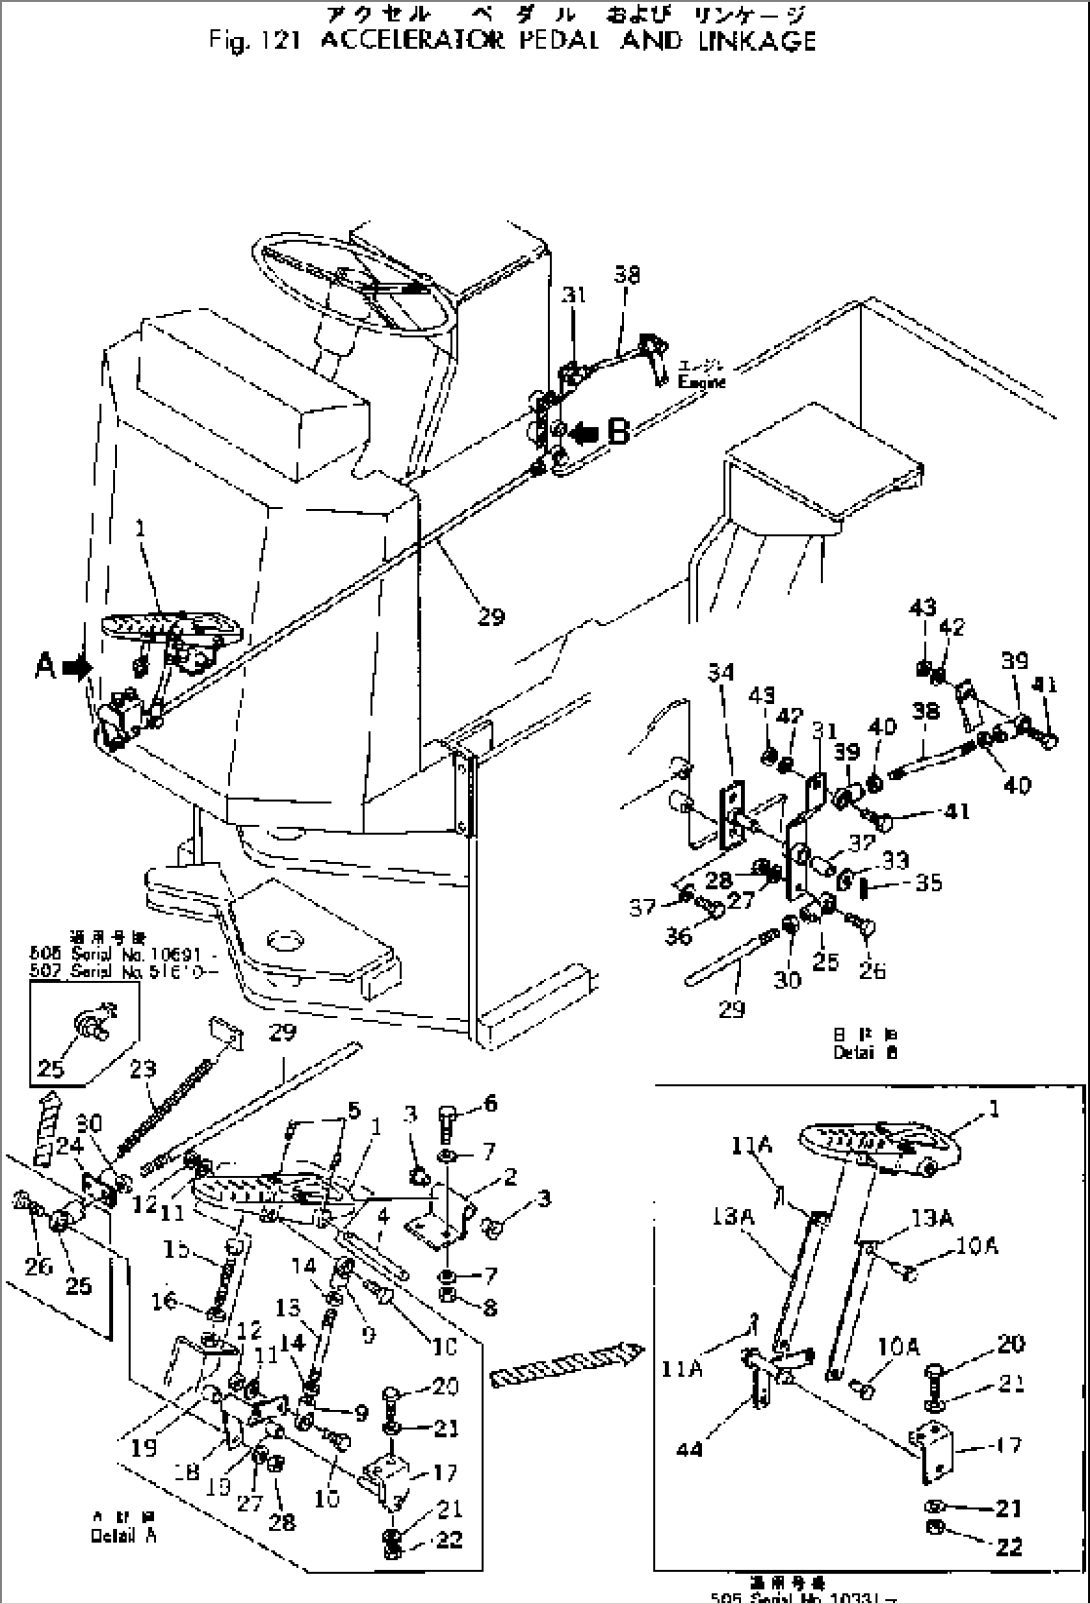 ACCELERATOR PEDAL AND LINKAGE